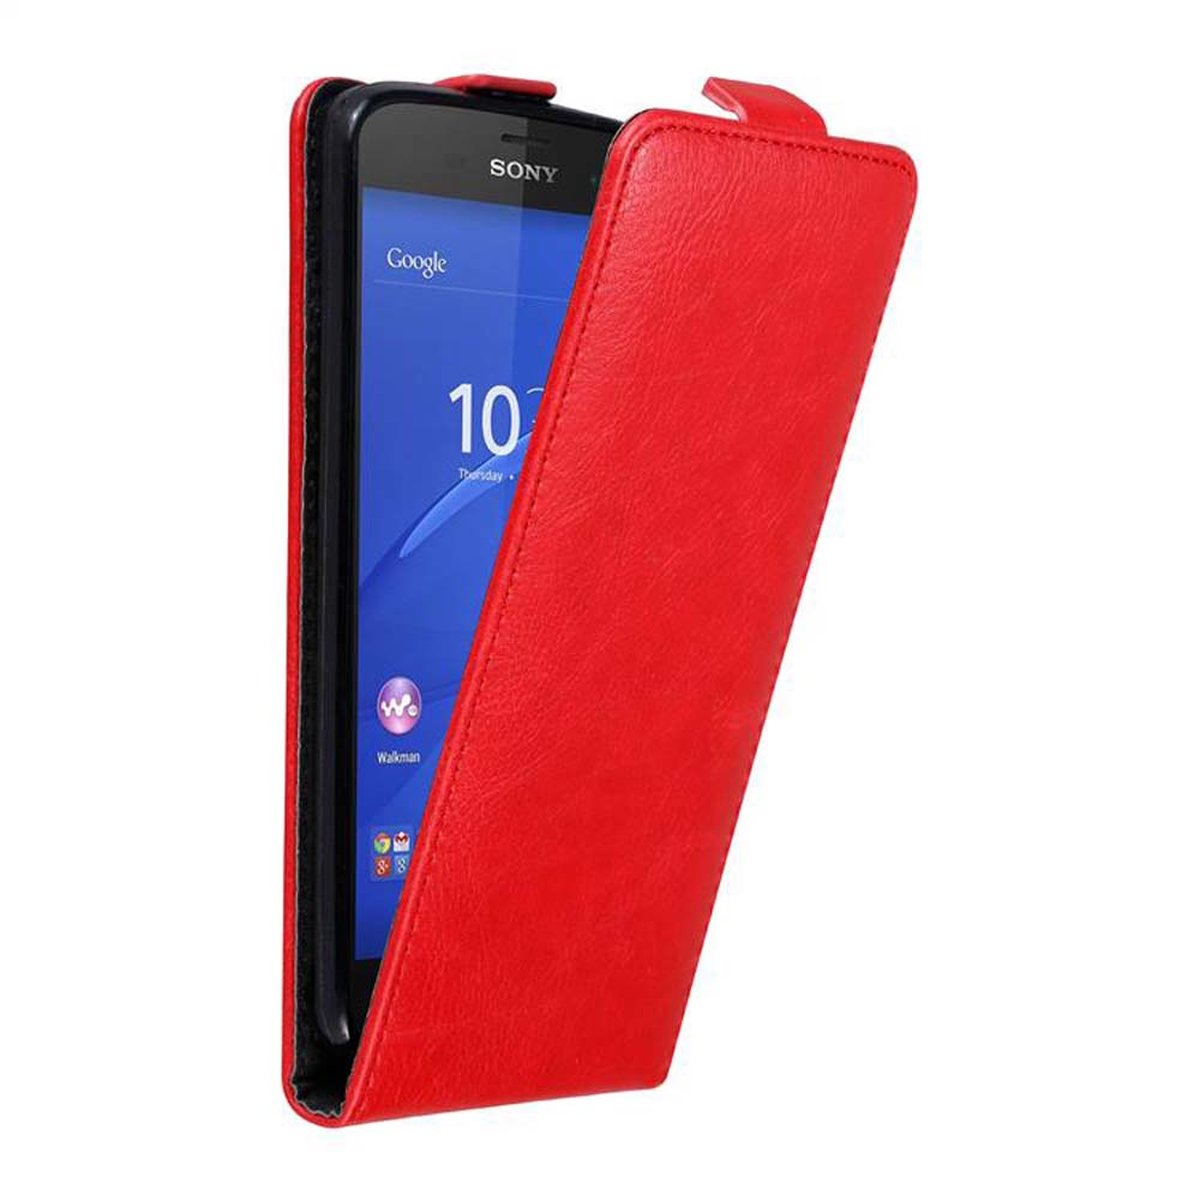 Cover, Xperia ROT COMPACT, Flip CADORABO Sony, APFEL Flip im Z3 Hülle Style,